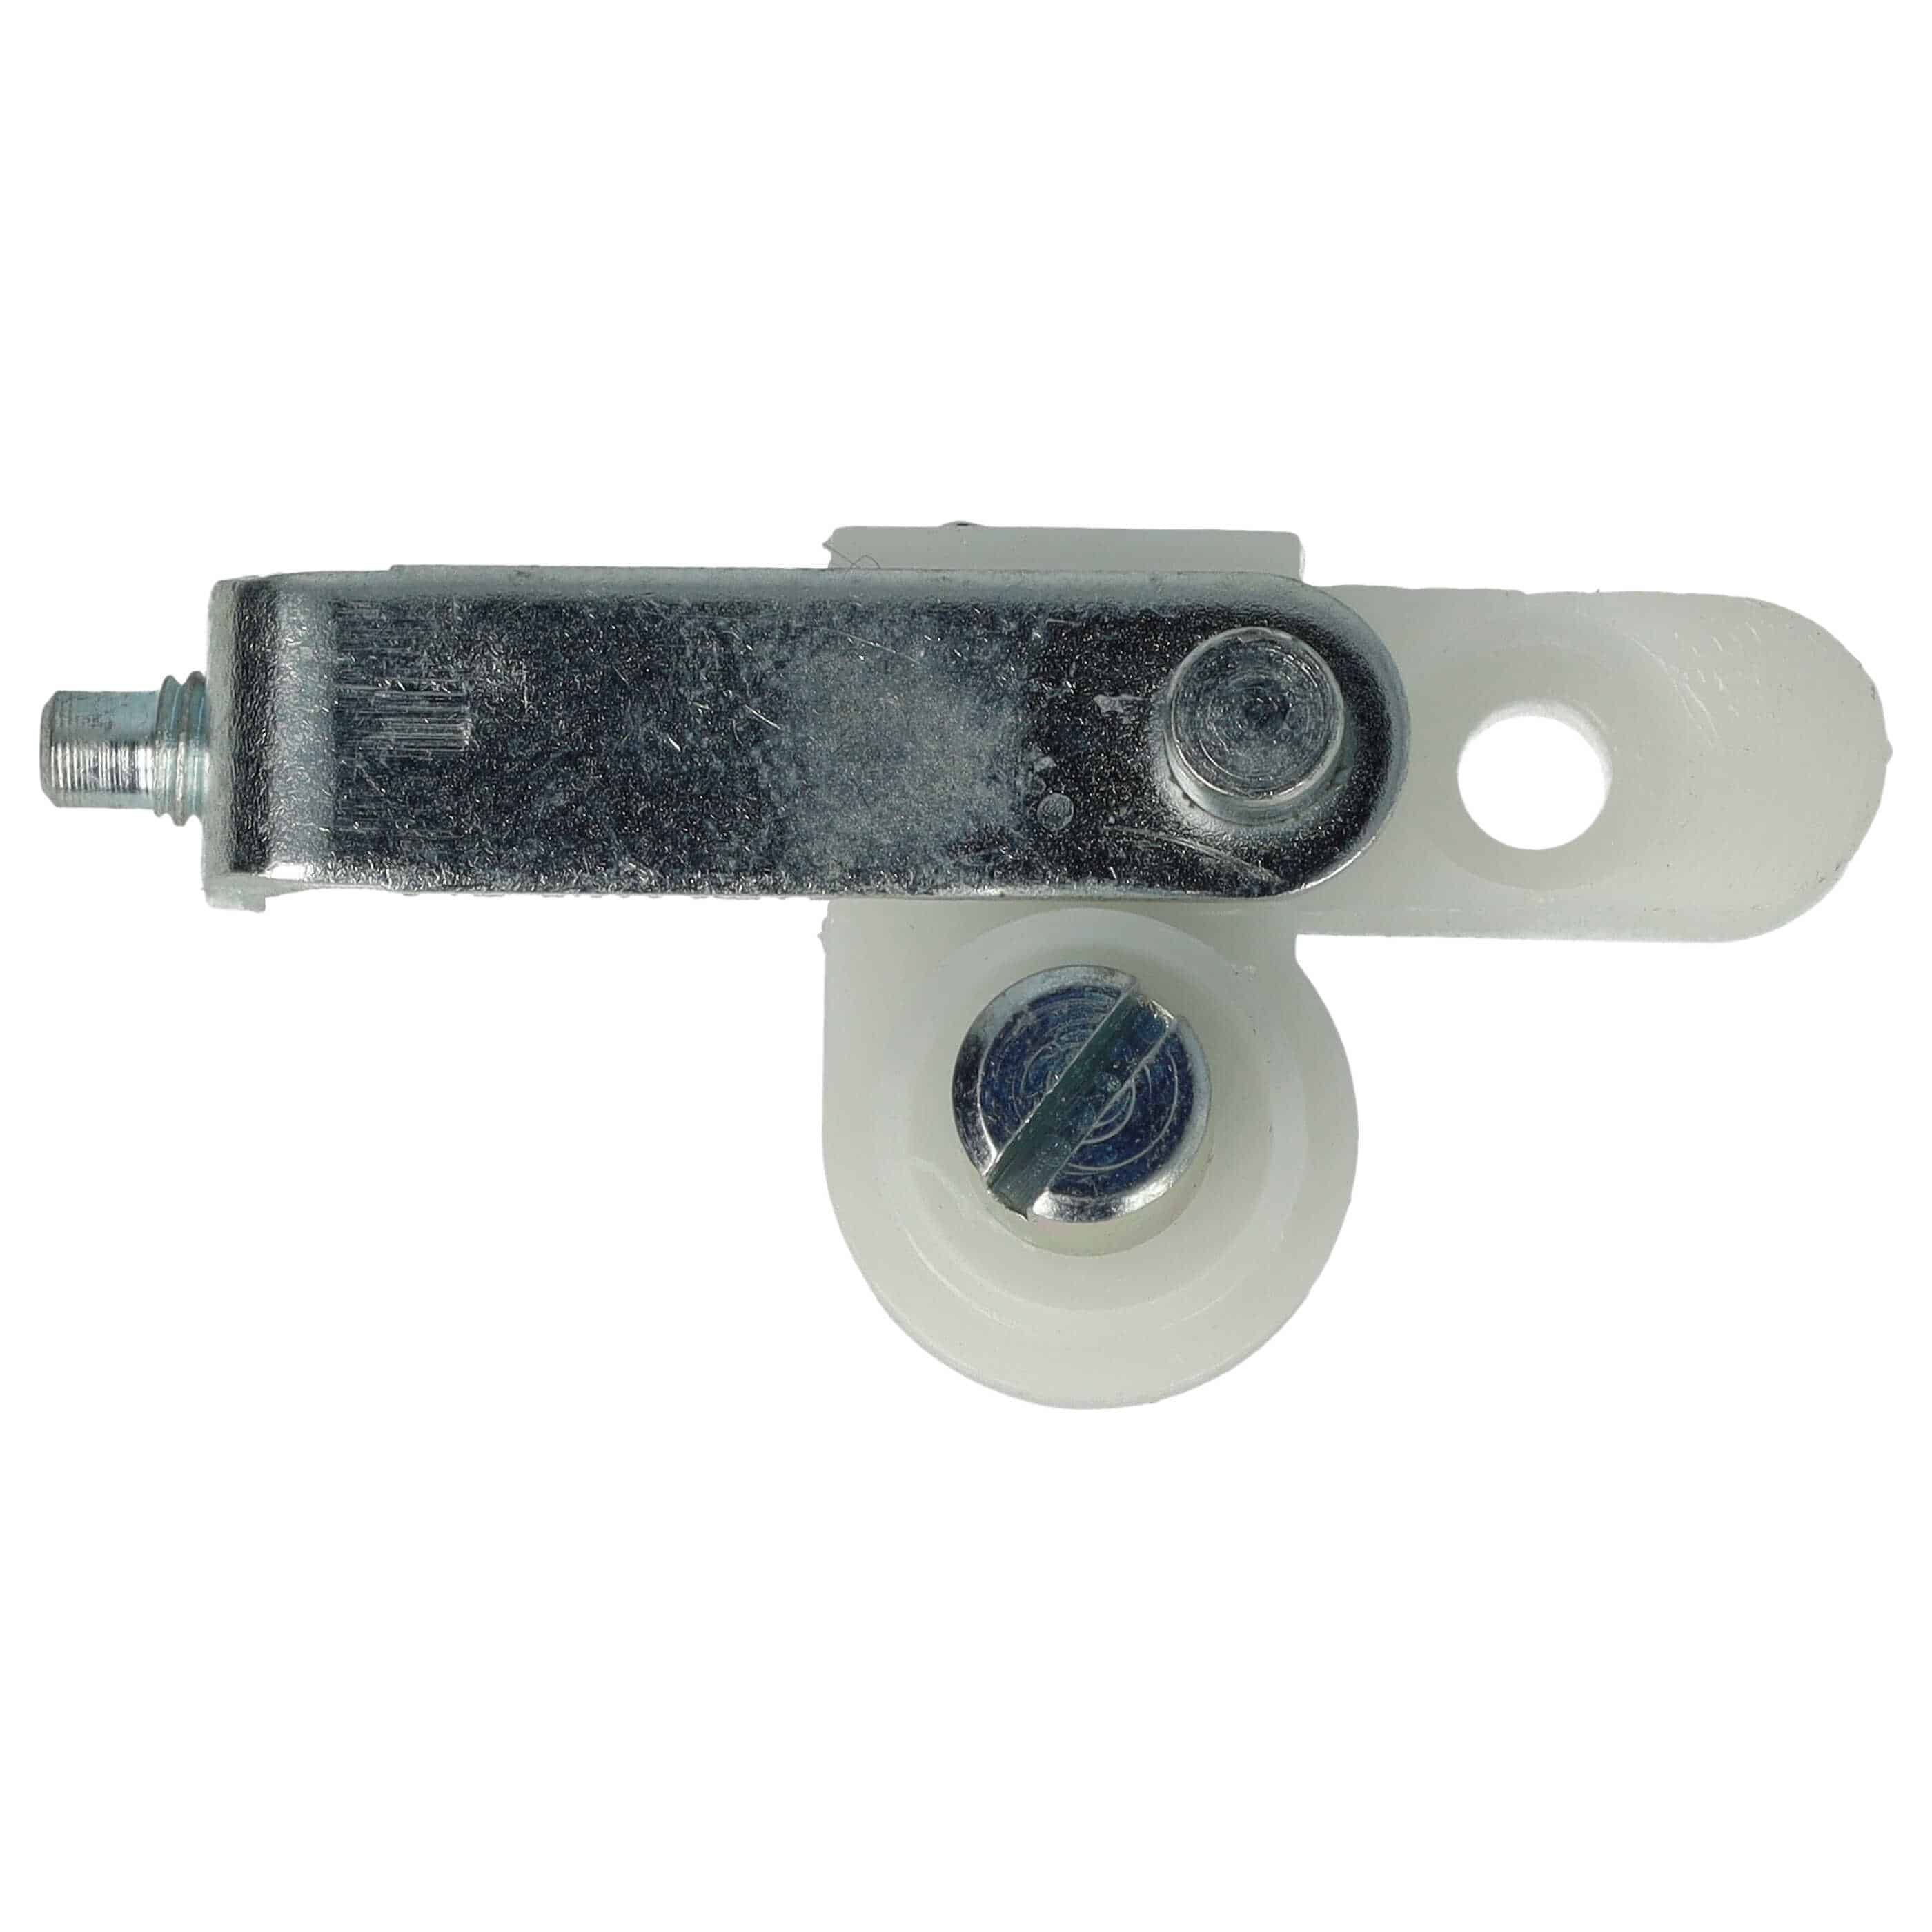 Side-Mounted Chain Tensioner, Adjusting Screw suitable for Stihl MS 170 Power Saw etc.